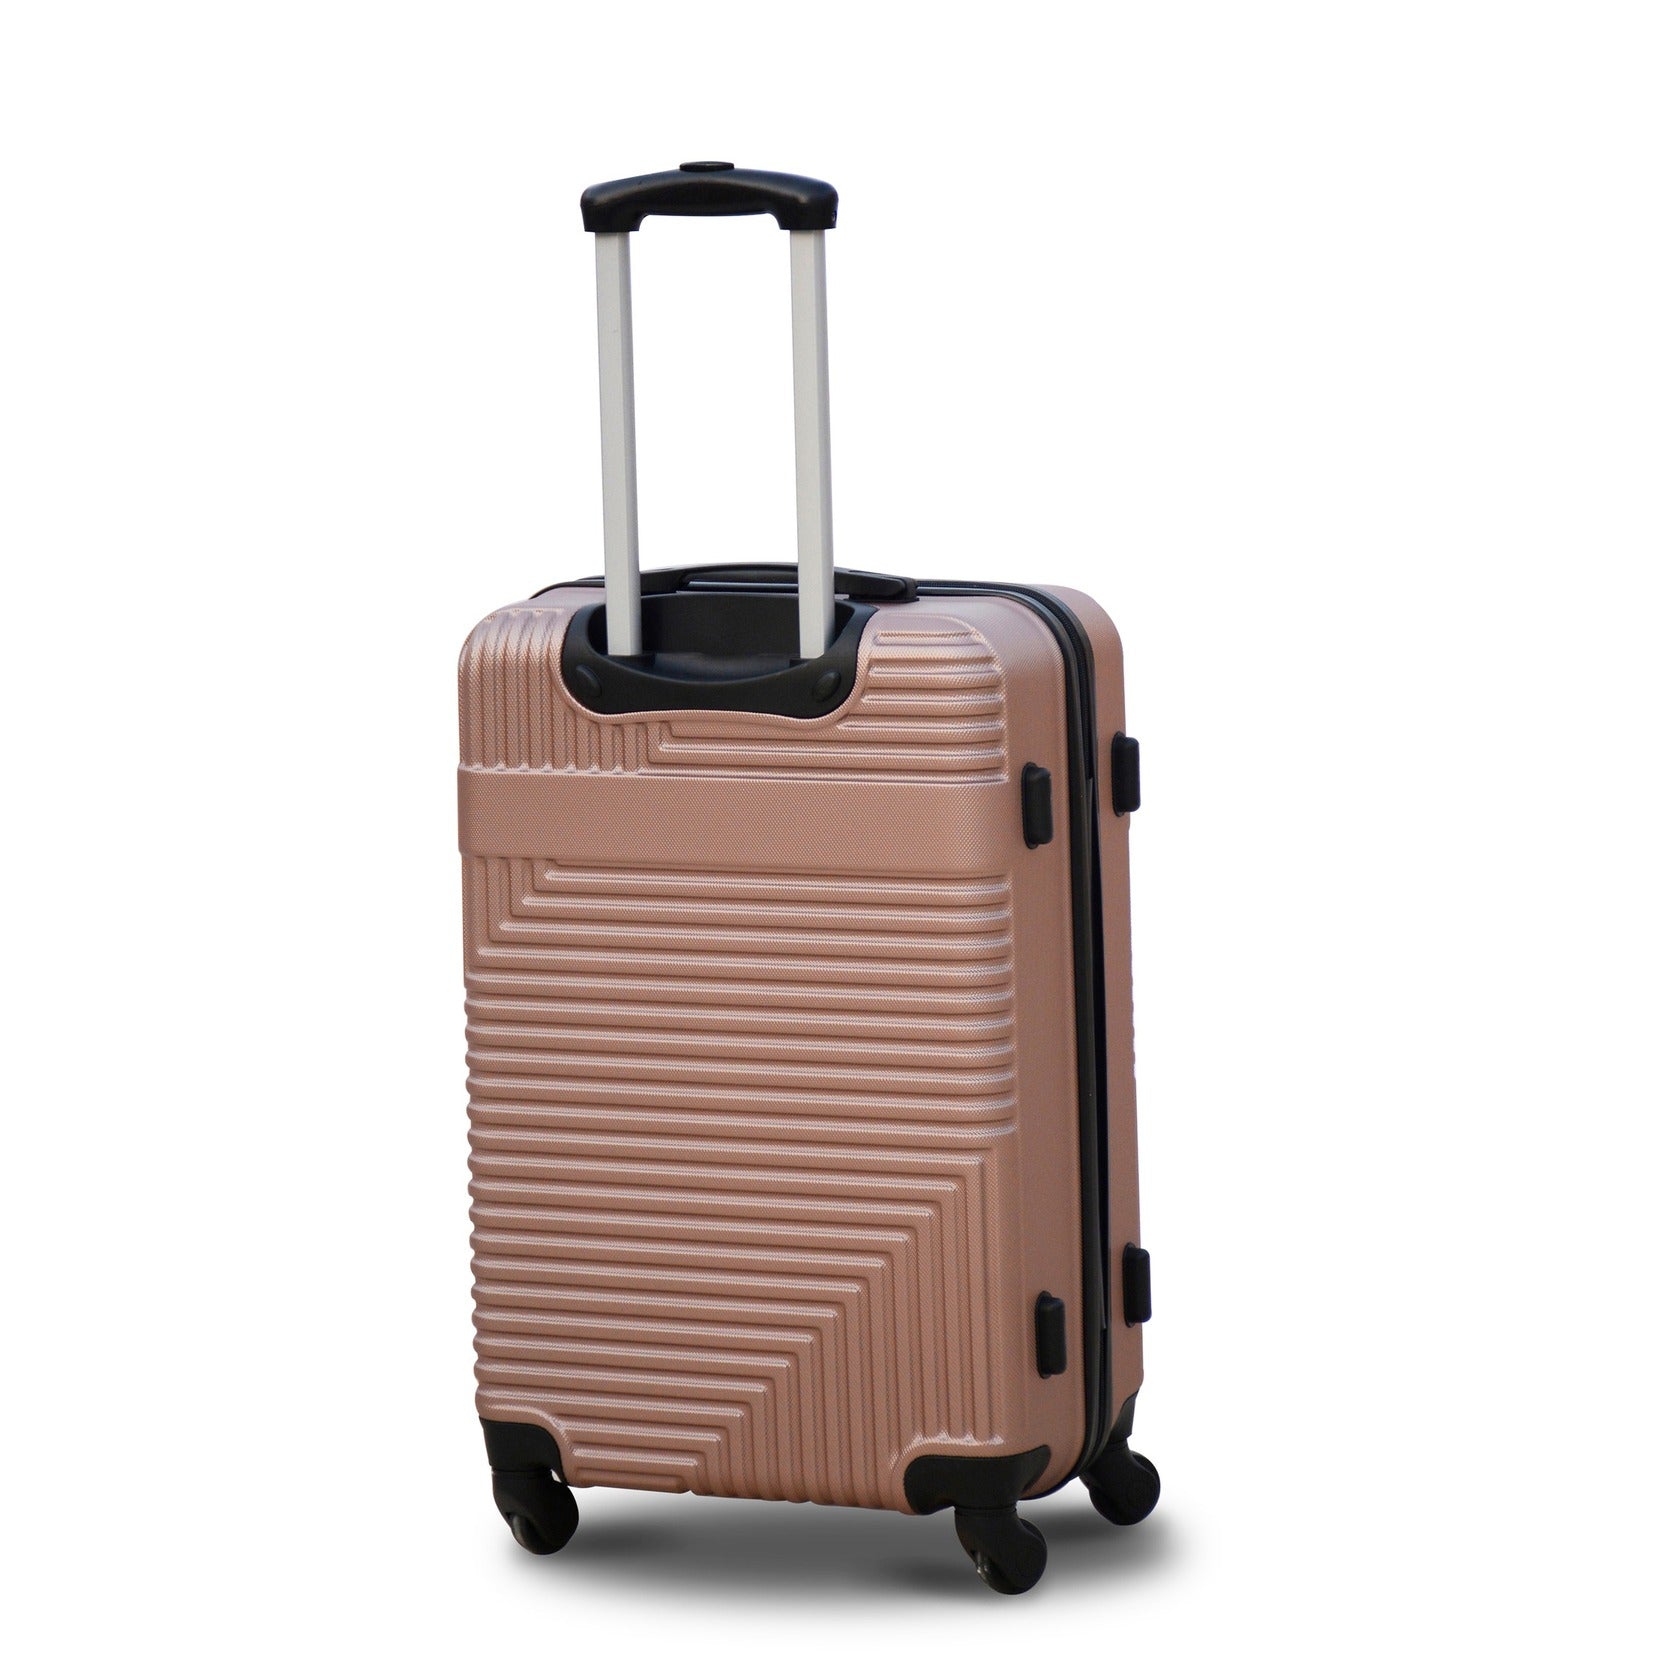 20" Rose Gold Colour Travel Way ABS Luggage Lightweight Hard Case Trolley Bag | 2 Year Warranty